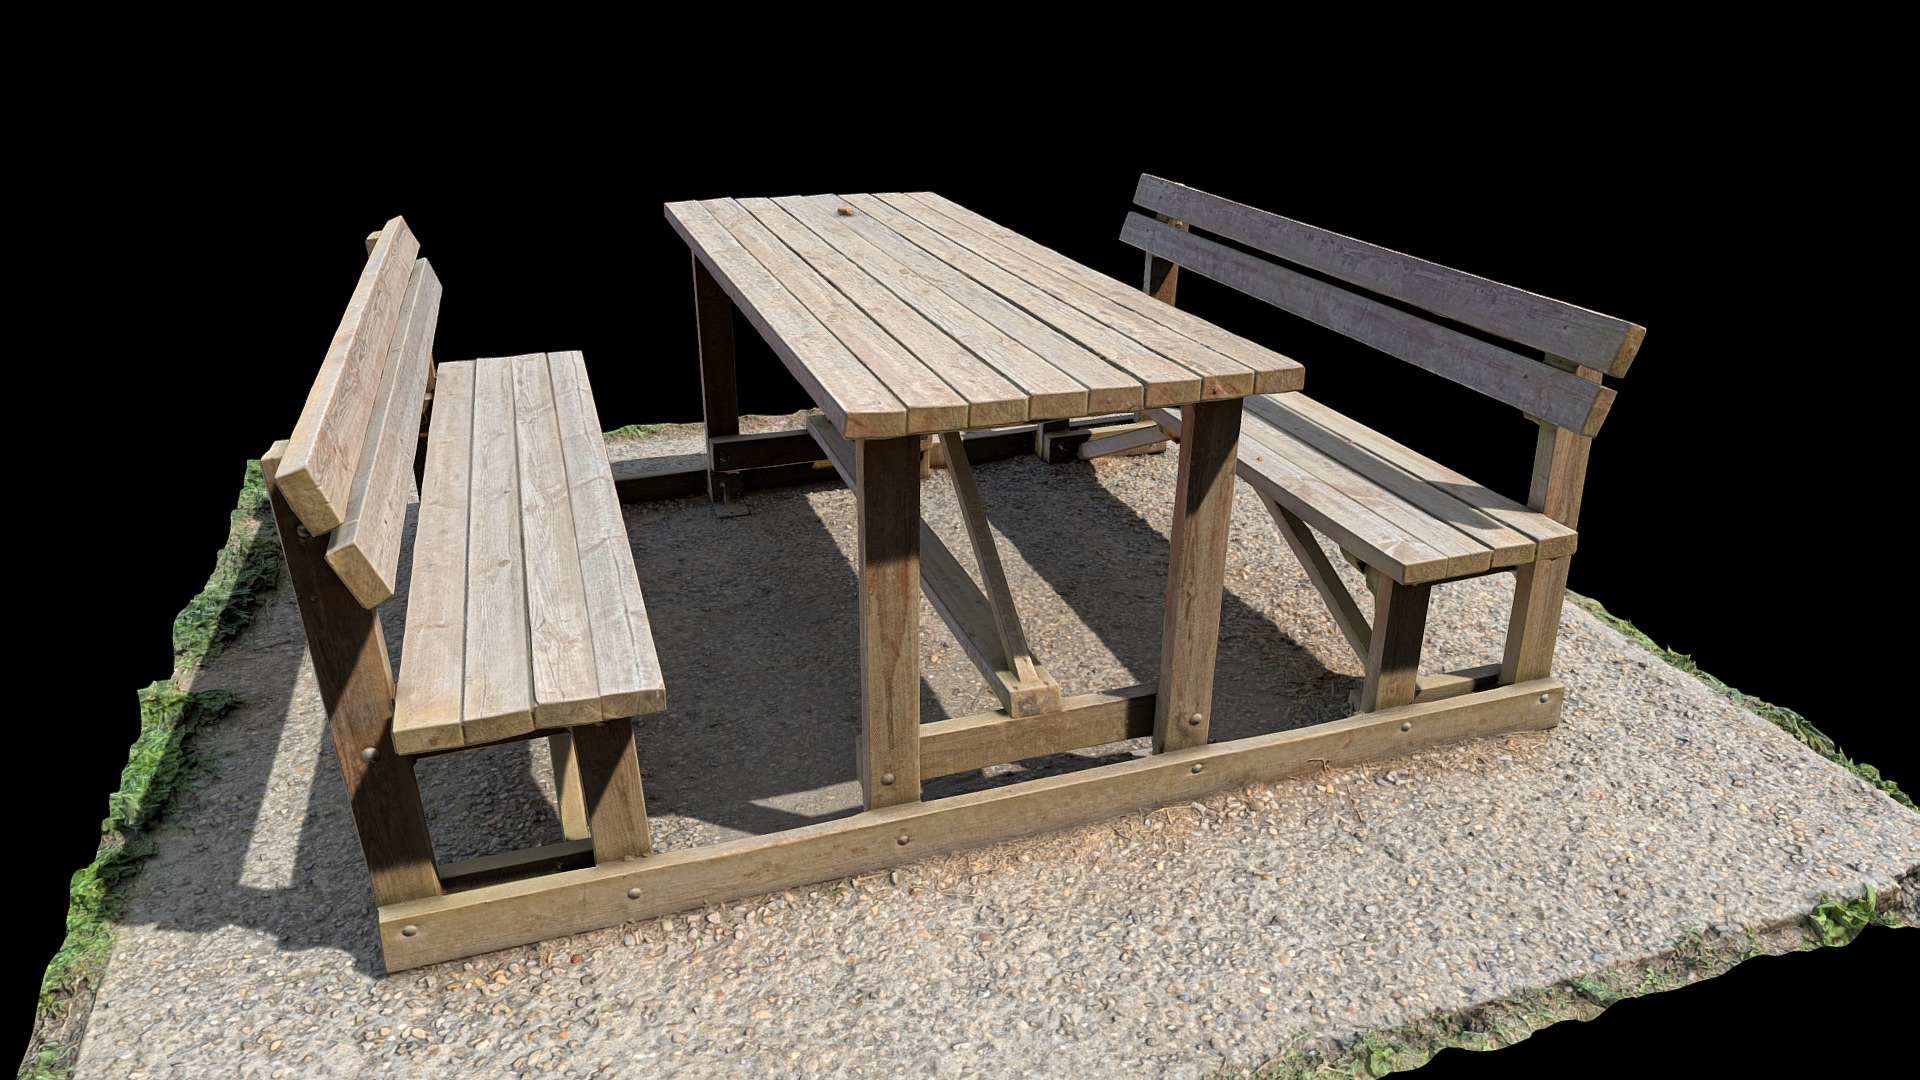 3D model Park Benches Wood - This is a 3D model of the Park Benches Wood. The 3D model is about a group of wooden benches.